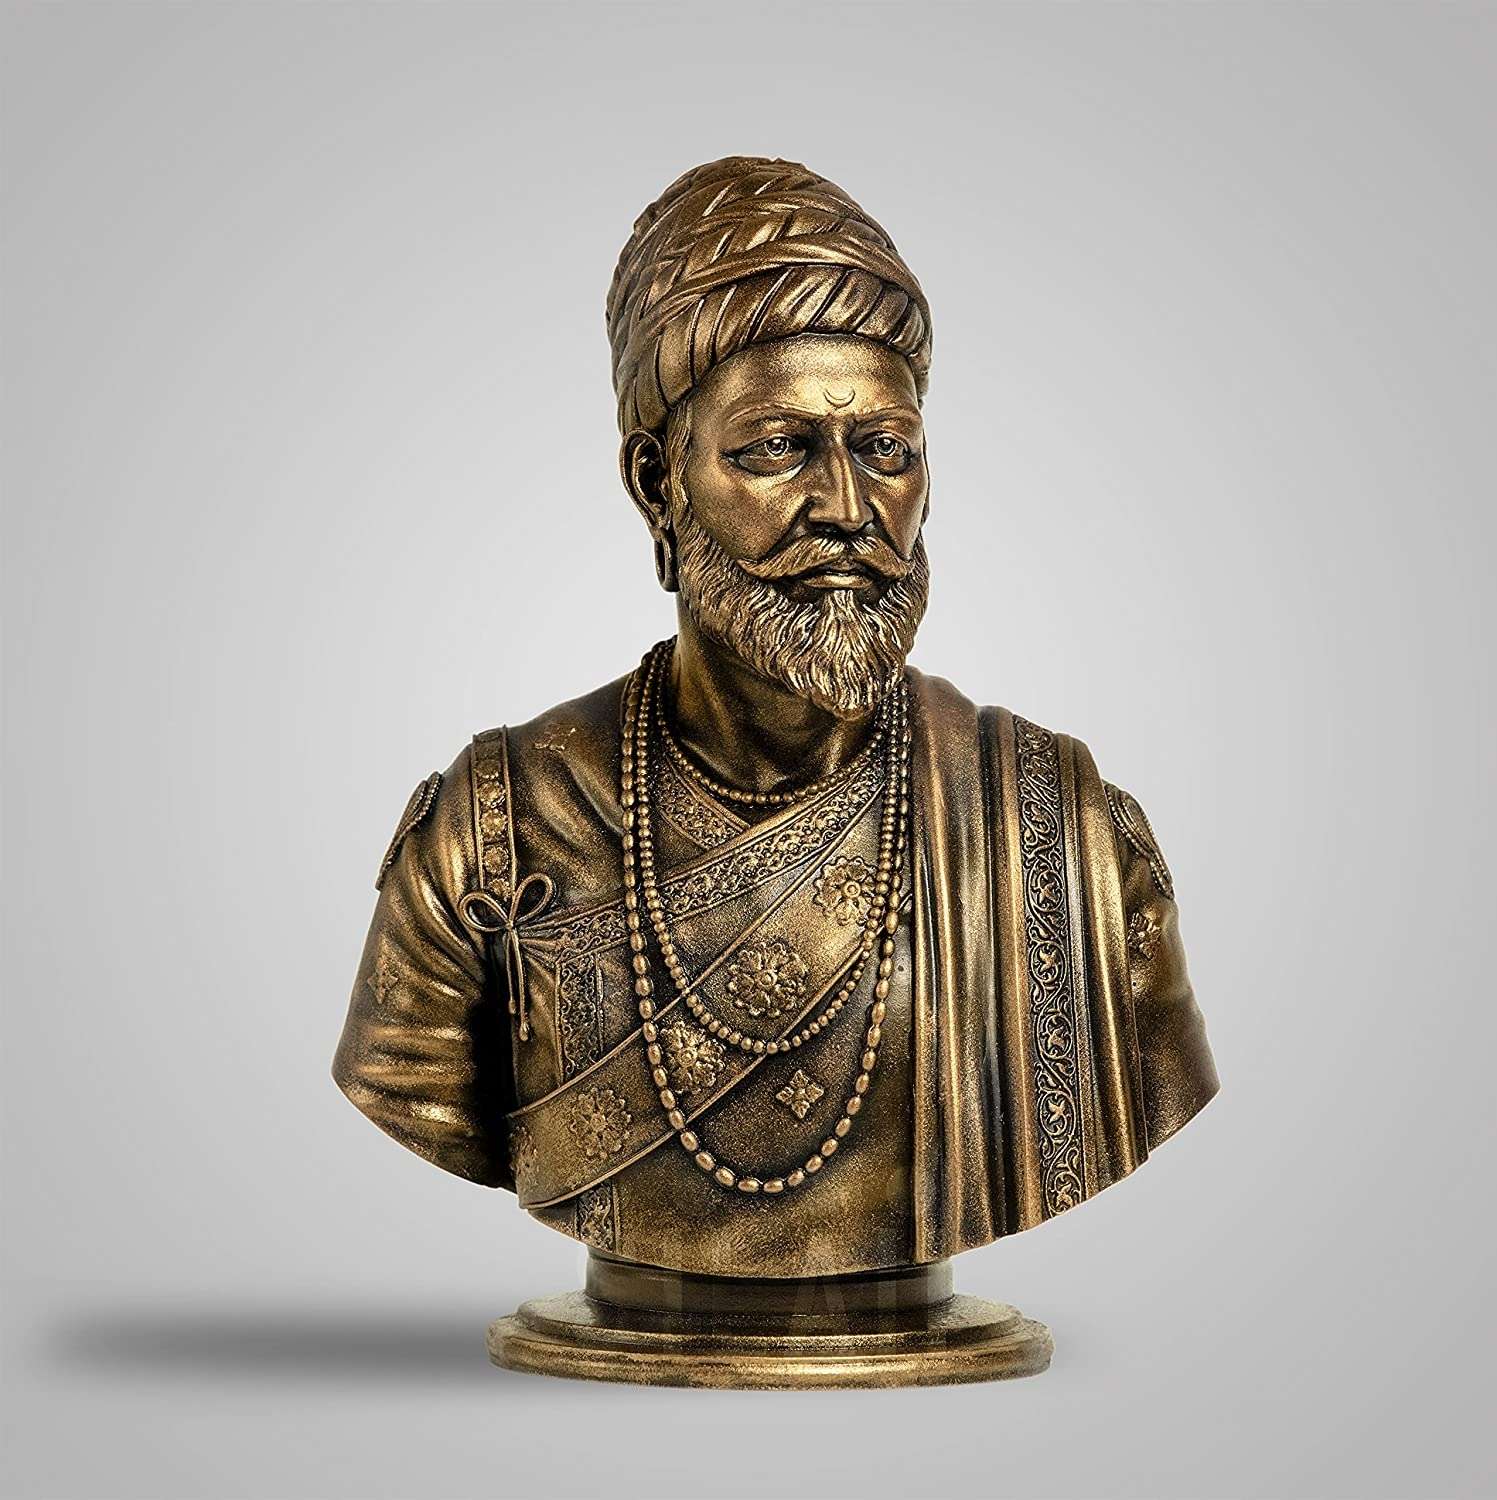 India Handcrafted Polyresin The Great Maratha WarriorKing ChhatraPati Shivaji  Maharaj Sculpture  Showpiece for Decoration Items for Home  Special Shiv  Jayanti Gift Purpose  the best price and delivery  Globally